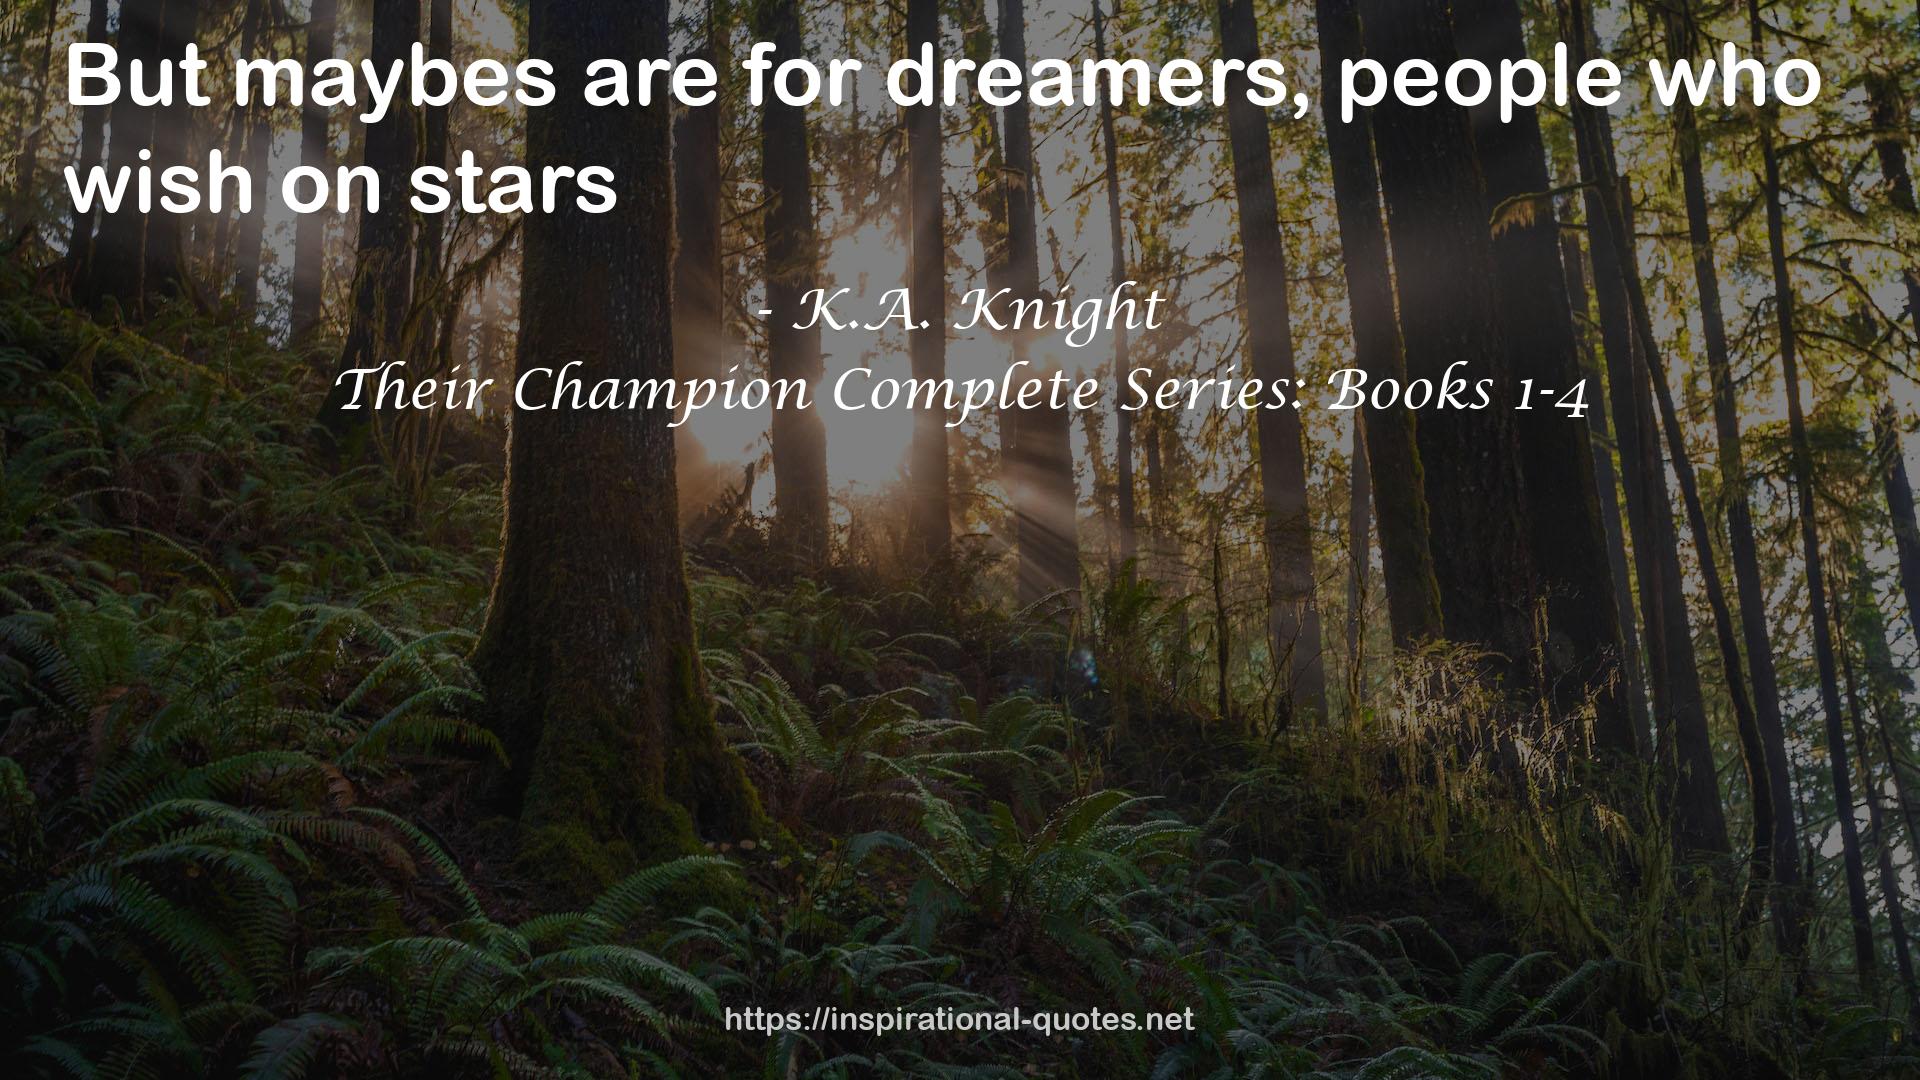 Their Champion Complete Series: Books 1-4 QUOTES